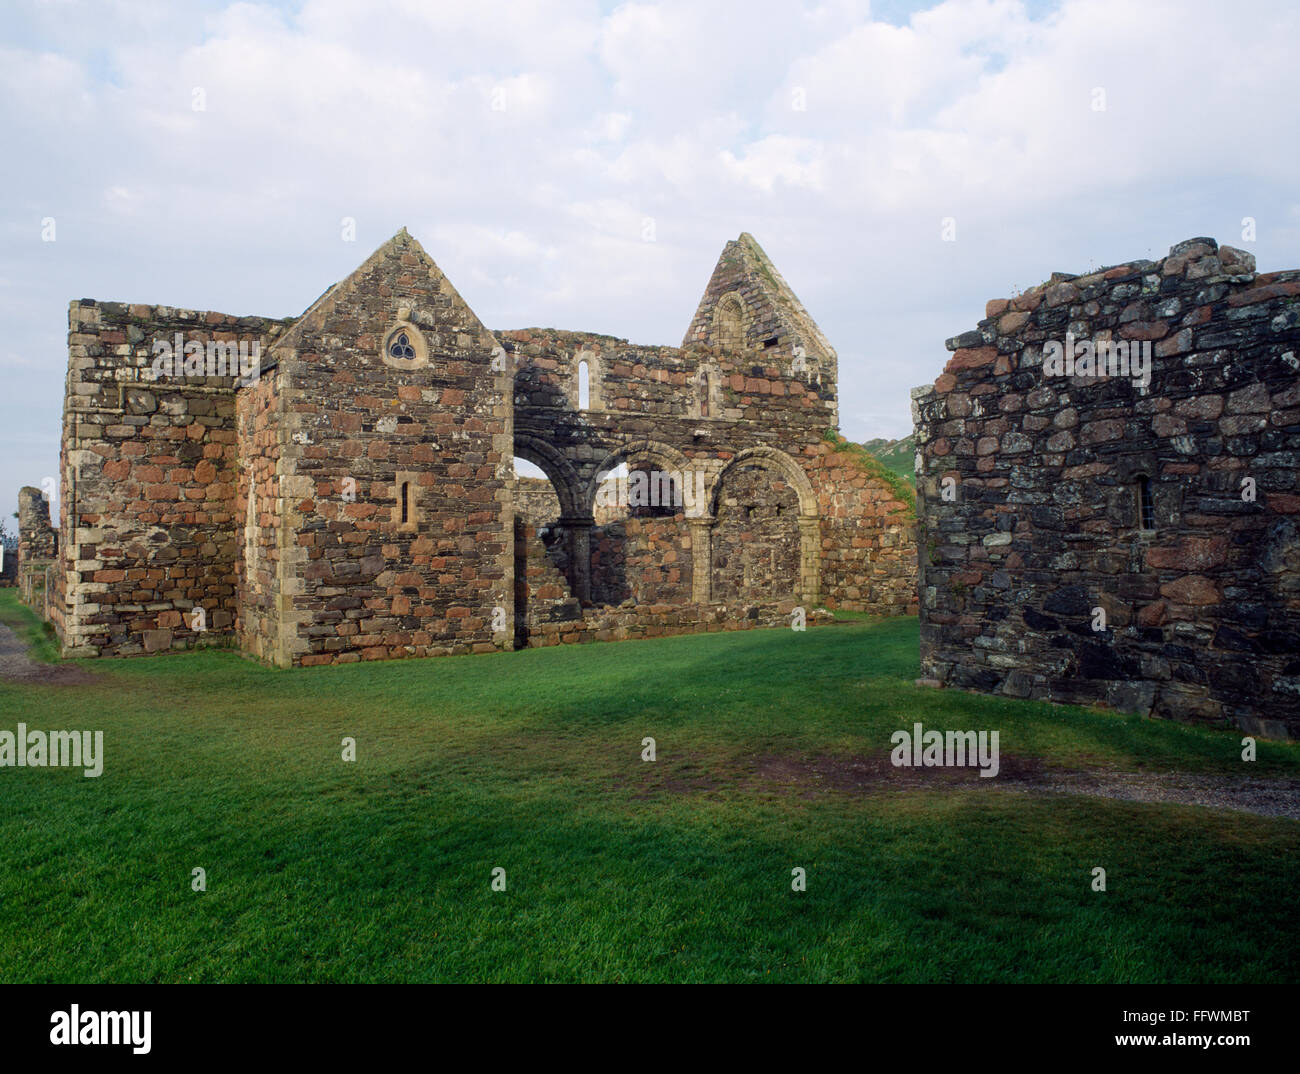 The ruins of the Iona Nunnery church seen from the north. Iona, Inner Hebrides, Scotland, UK. shows north transept and arcading of the nave Stock Photo